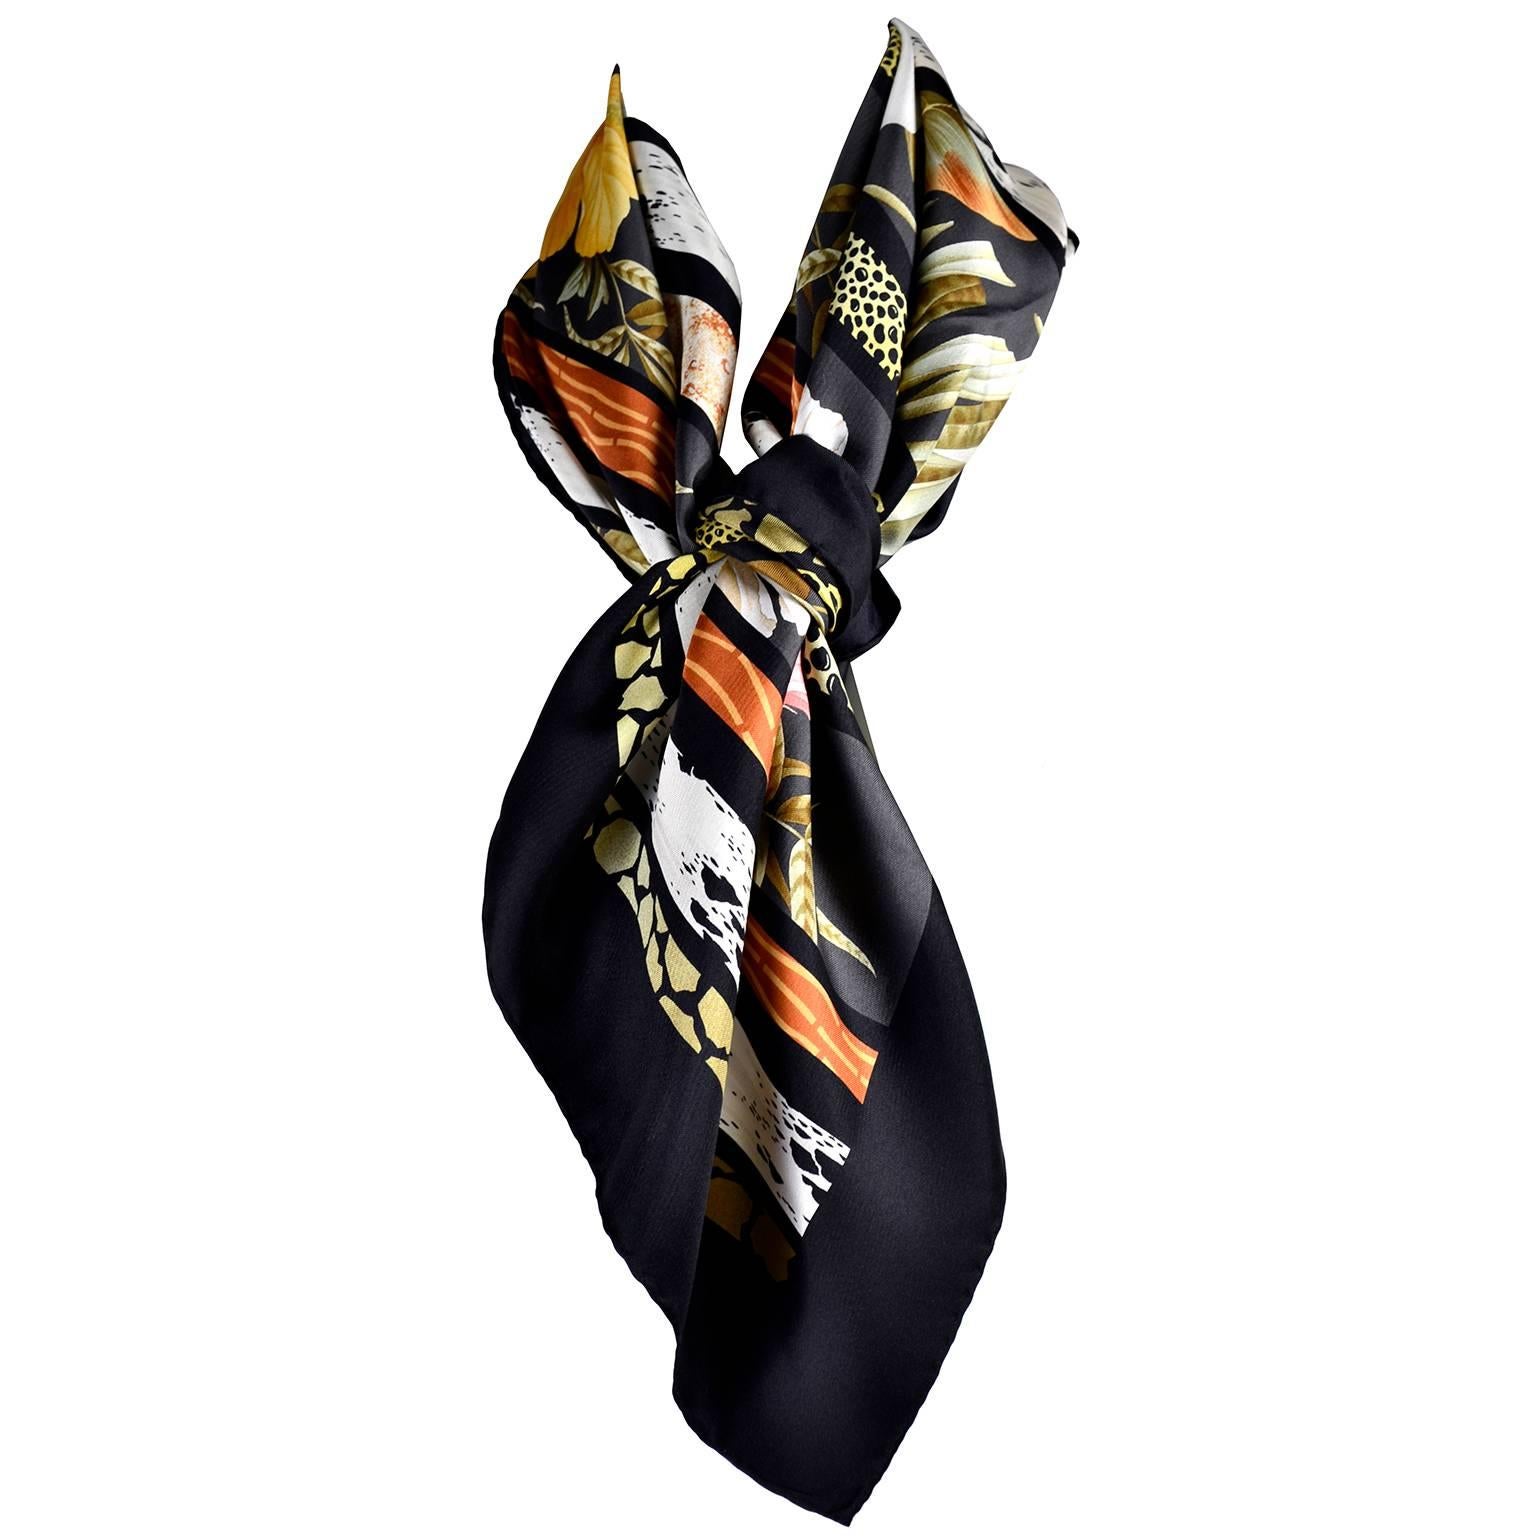 This is a wonderful vintage silk scarf by Salvatore Ferragamo in black with strips of animal prints and yellow & pink hibiscus flowers, calla lilies and green leaves.  This gorgeous vintage silk scarf measures 34